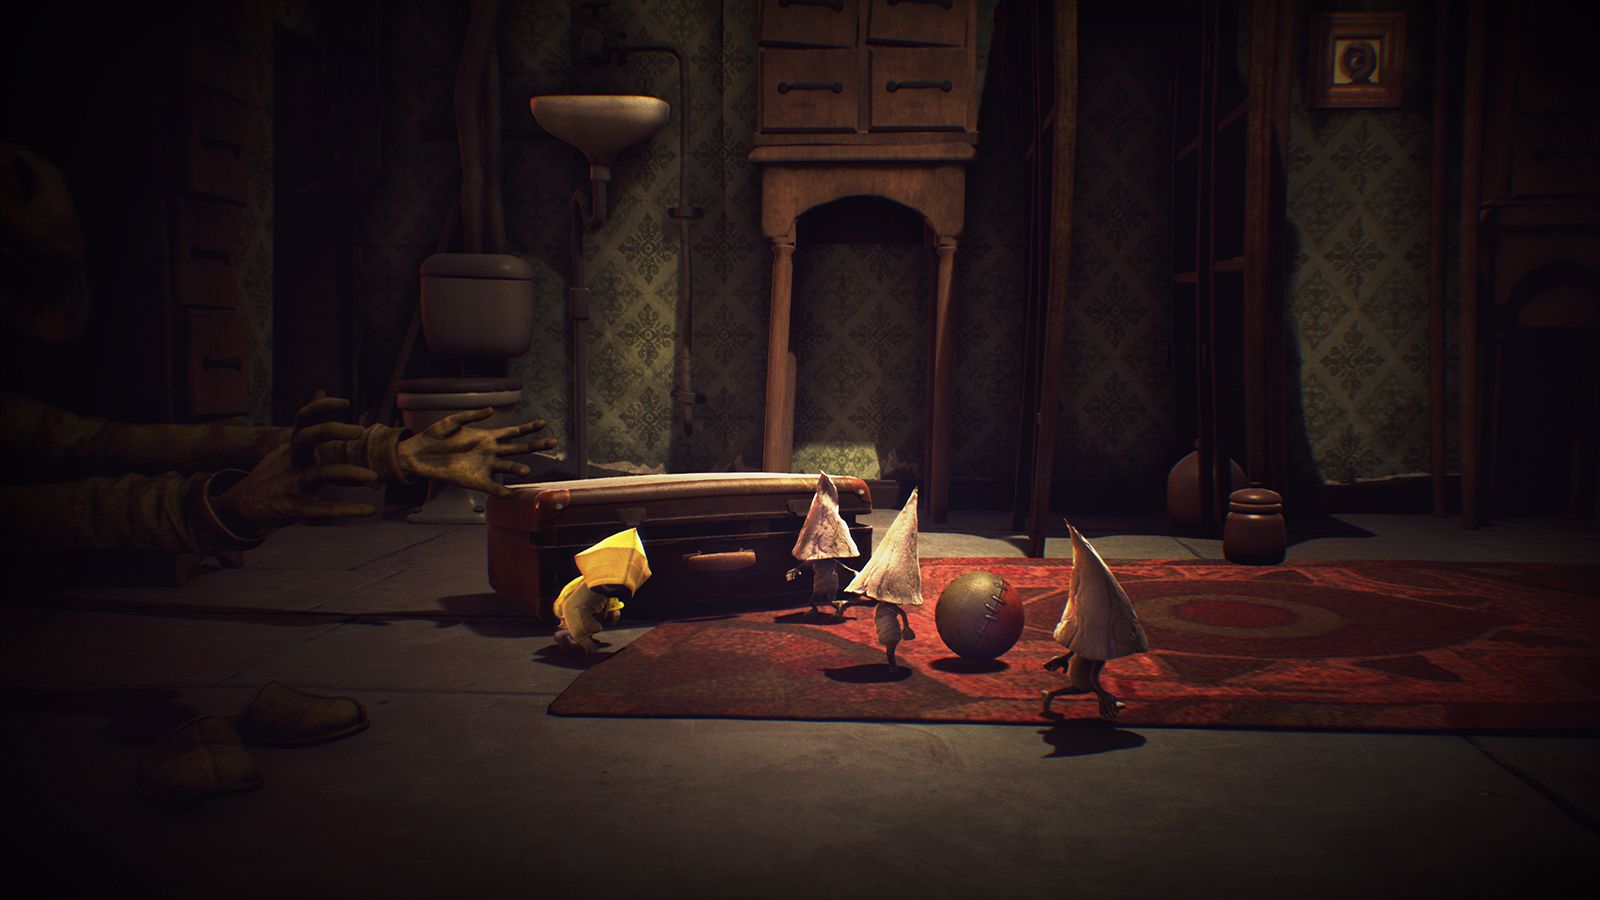 little nightmares review image 4